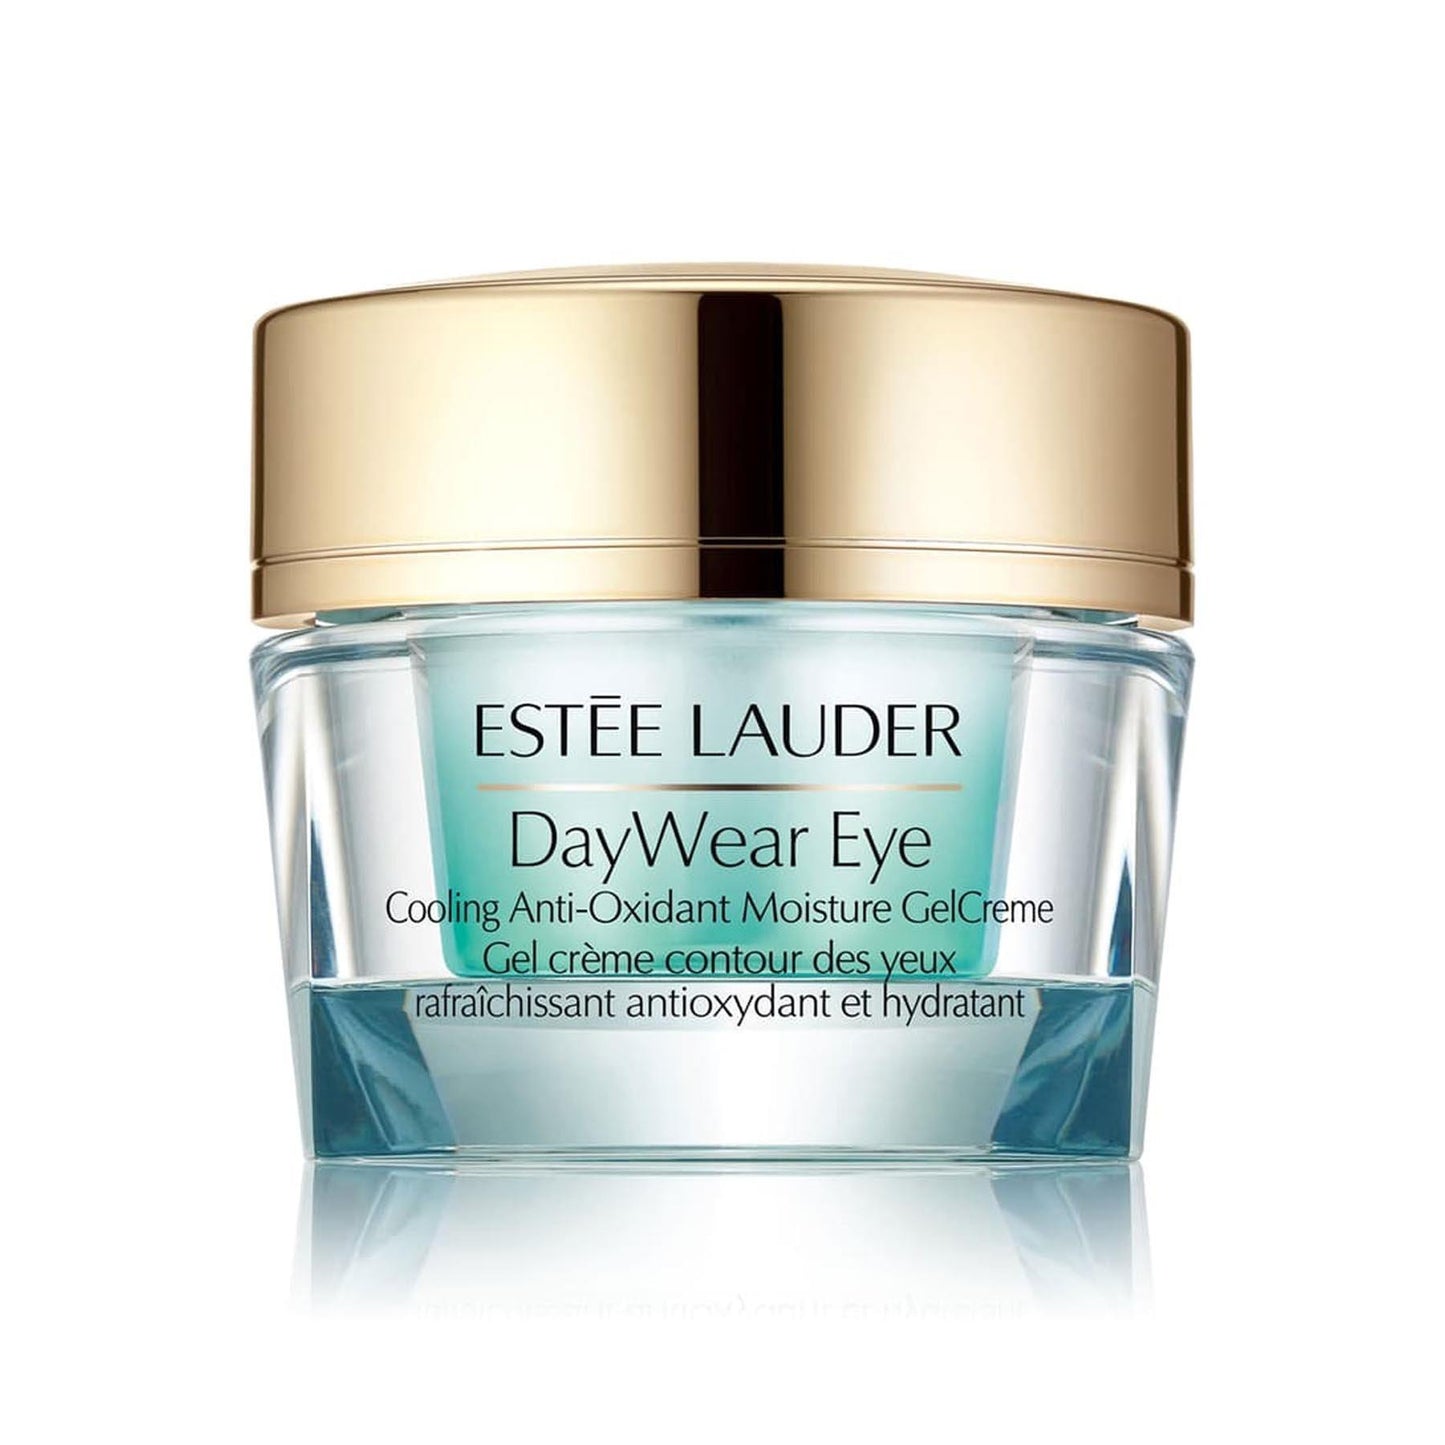 DayWear Eye Cooling Anti-Oxidant Moisture GelCreme - Cosmos Boutique New Jersey